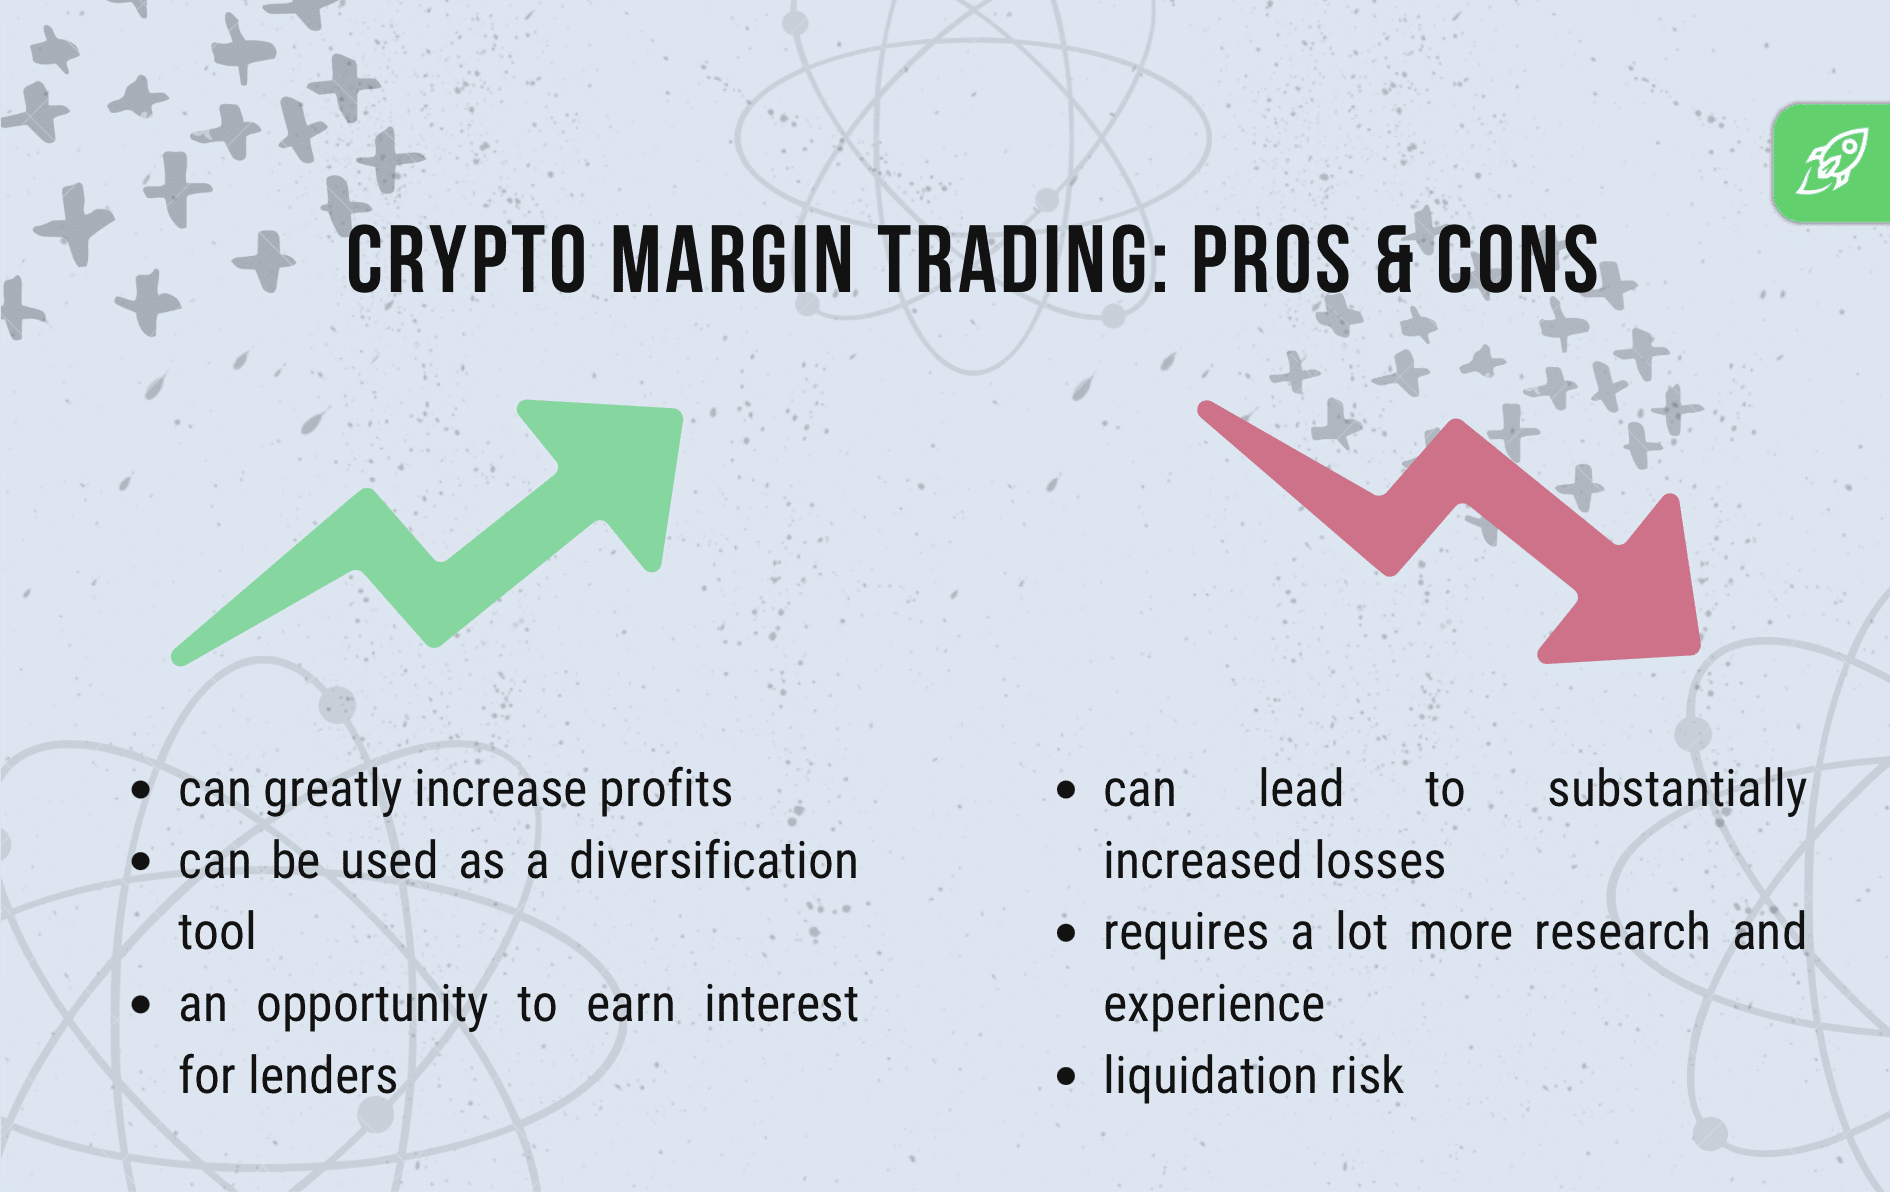 The pros and cons of crypto margin trading